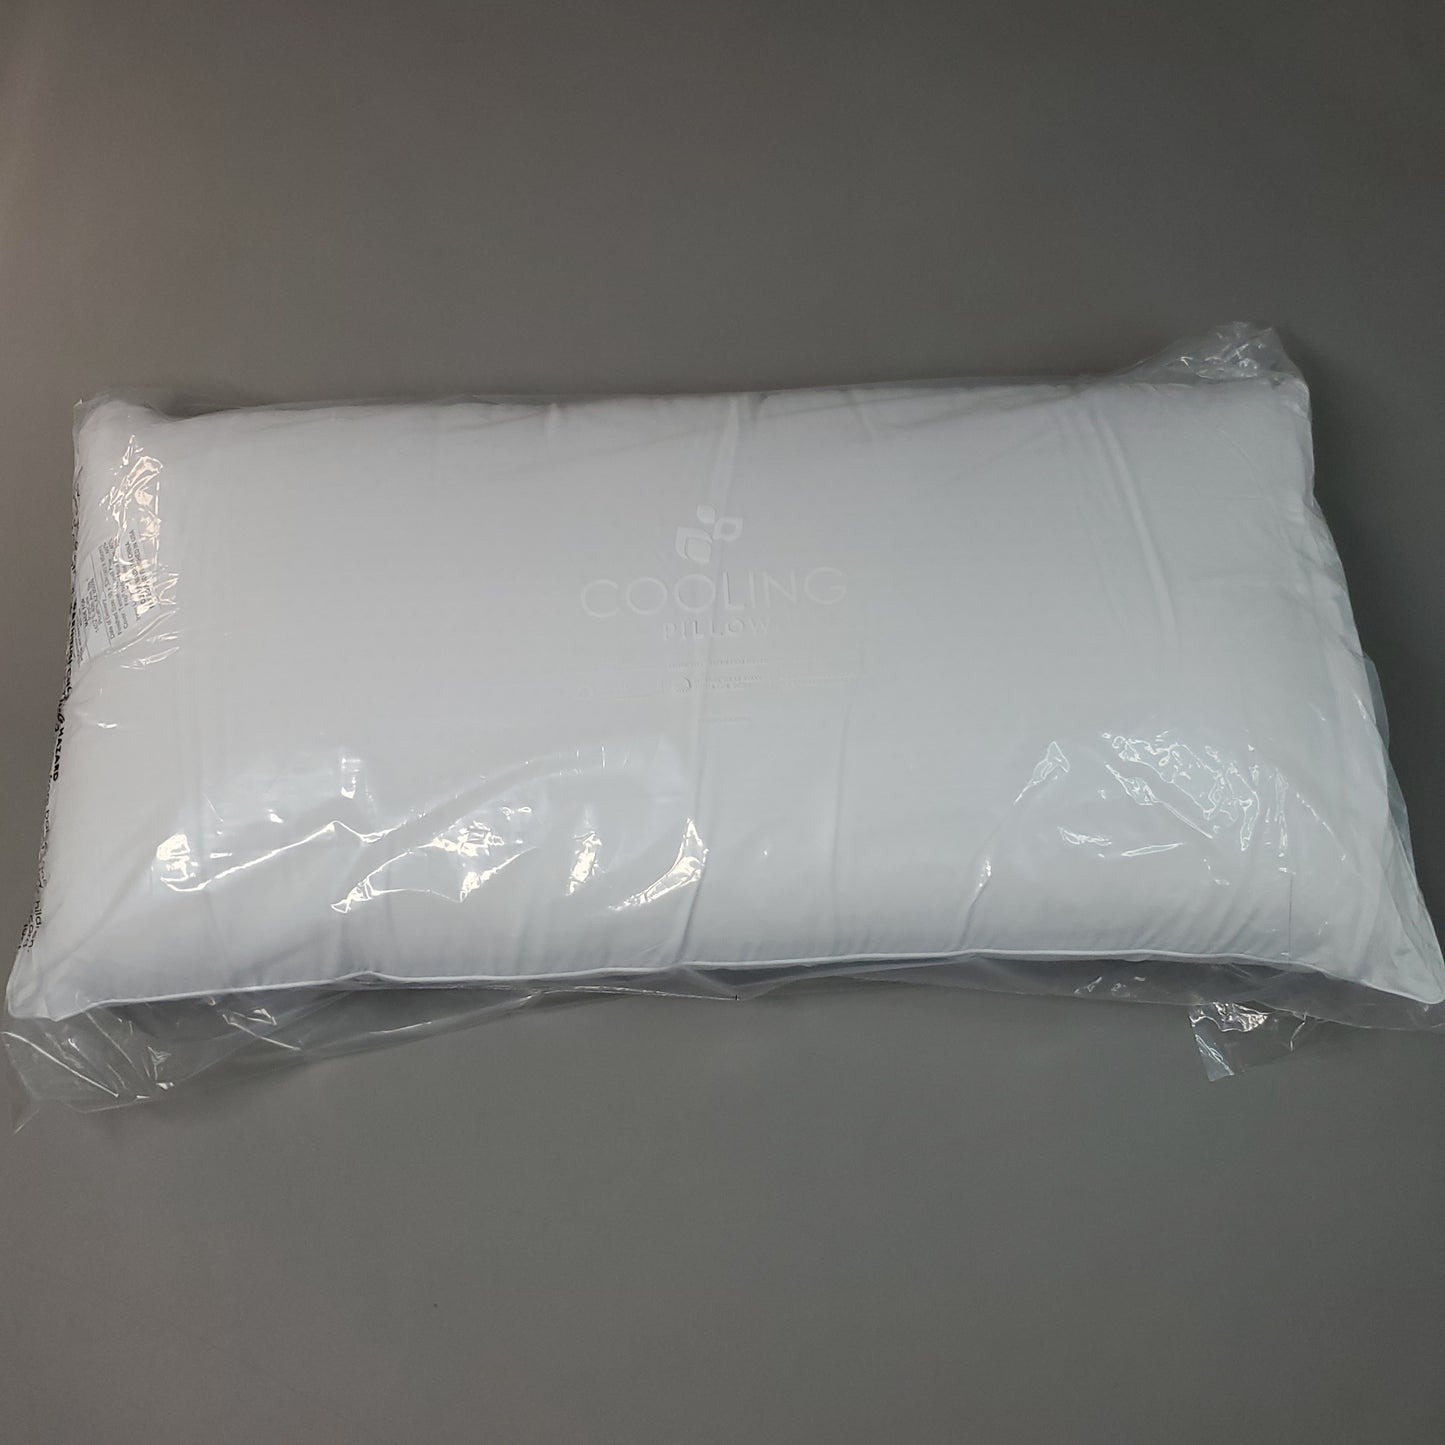 Sub-0 Soft Latex Complete Core 100% Talalay Pillow 33"x16" King PCFRIOL626 (New)